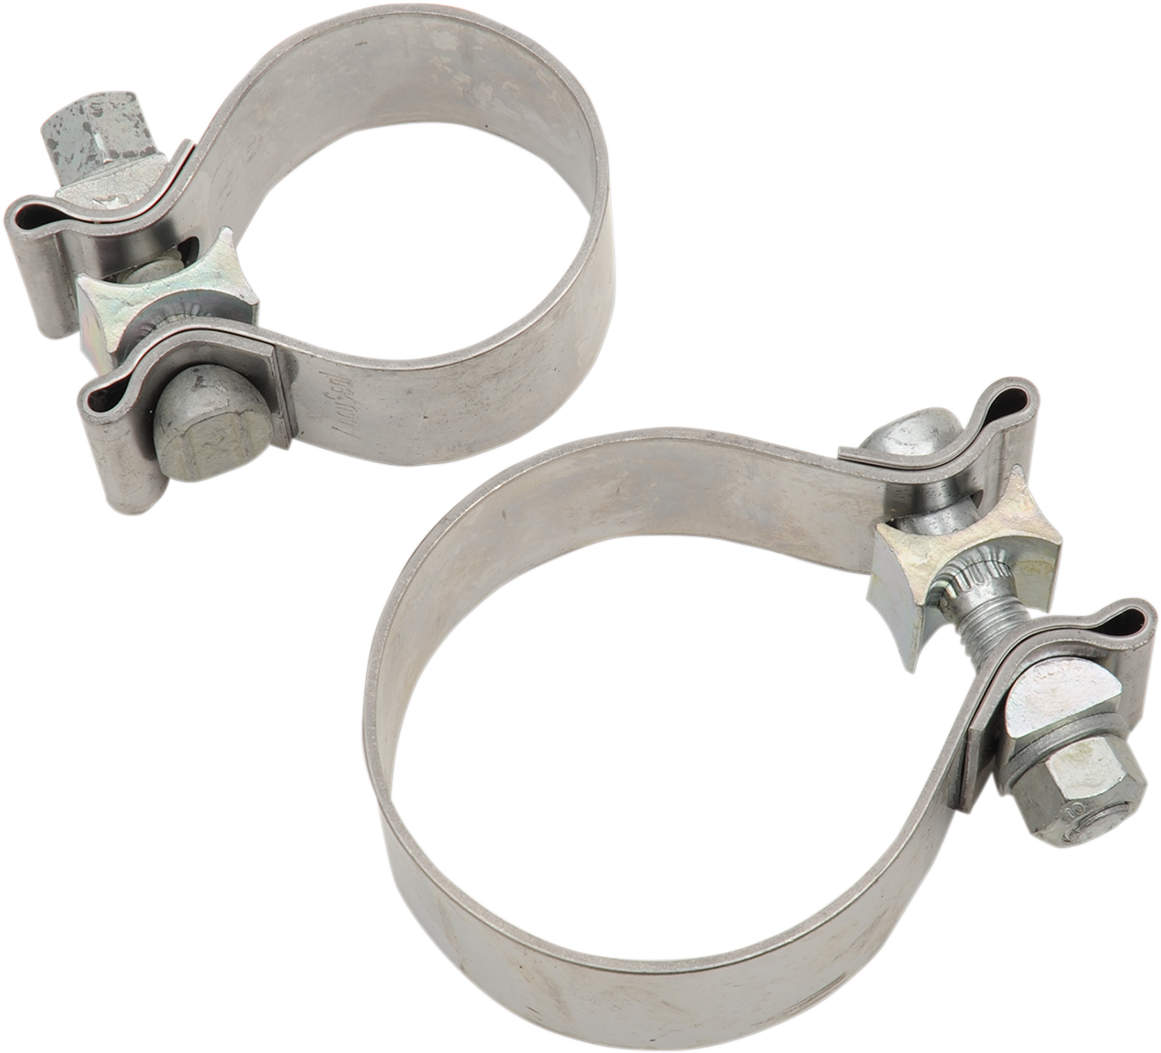 Khrome Werks 1.75"-2" Stainless Steel Exhaust Clamps for 2017-23 Harley Touring